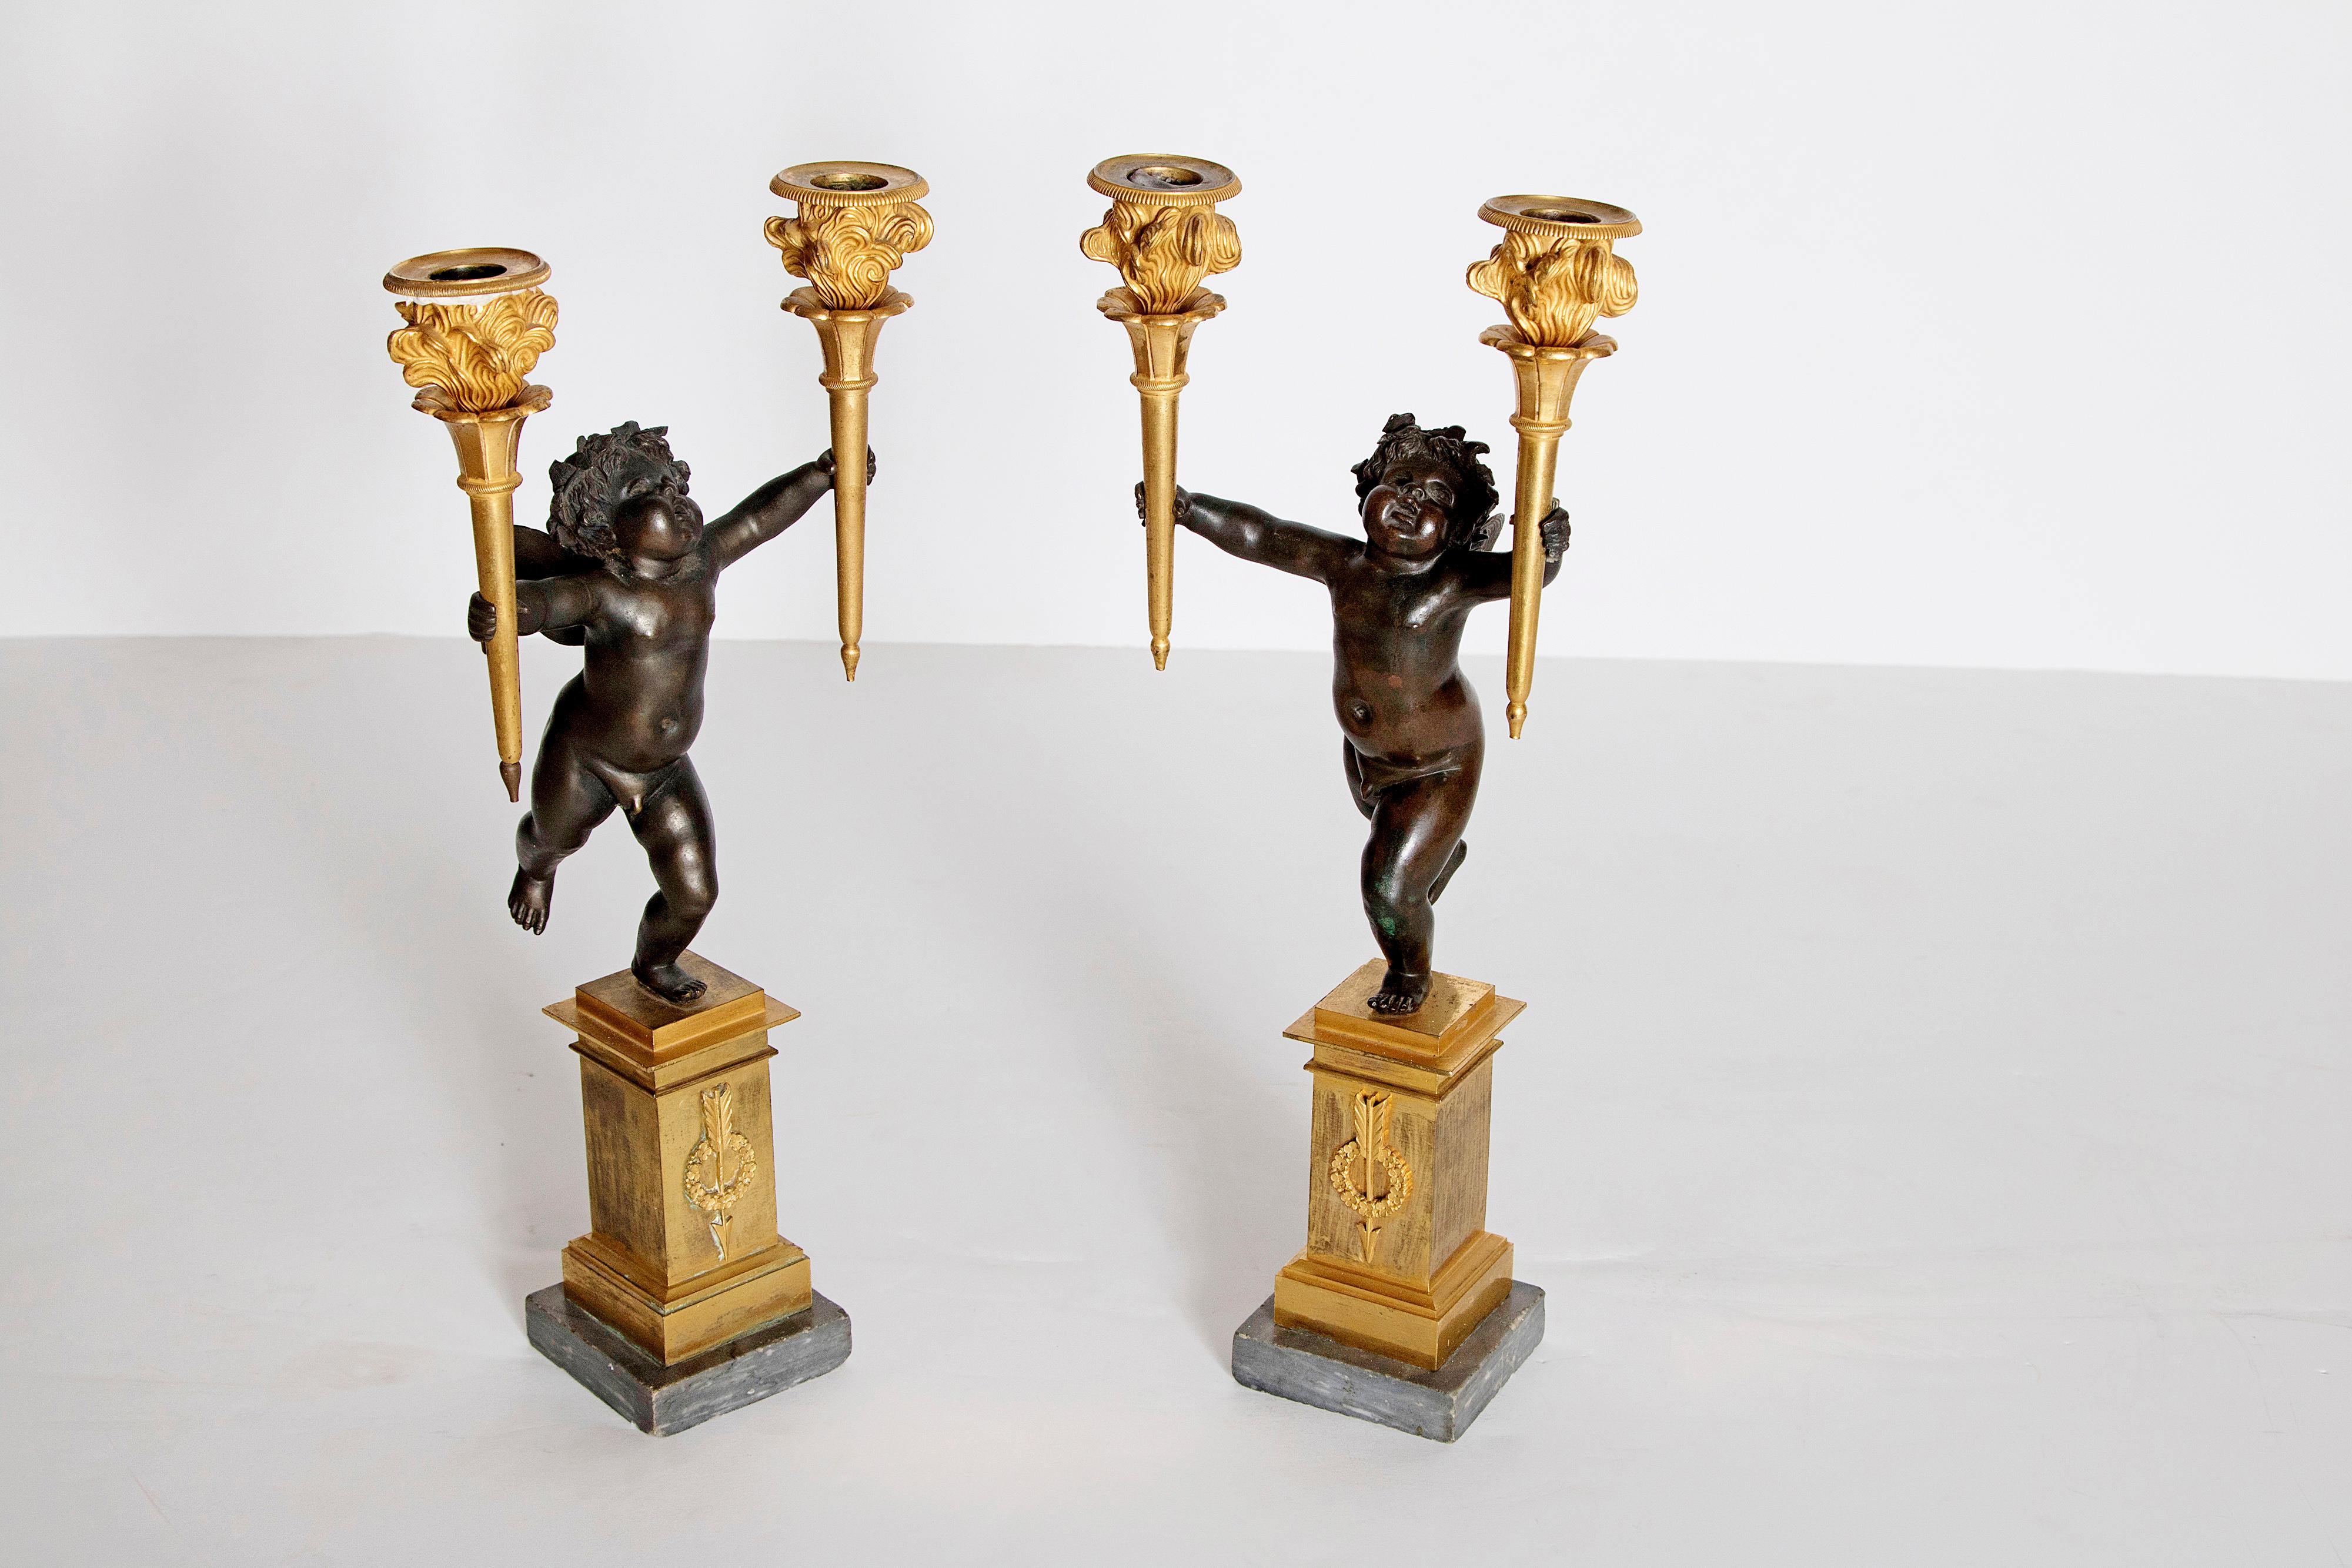 Pair of French Charles X Patinated Bronze and Gilt Figurative Candelabras For Sale 11